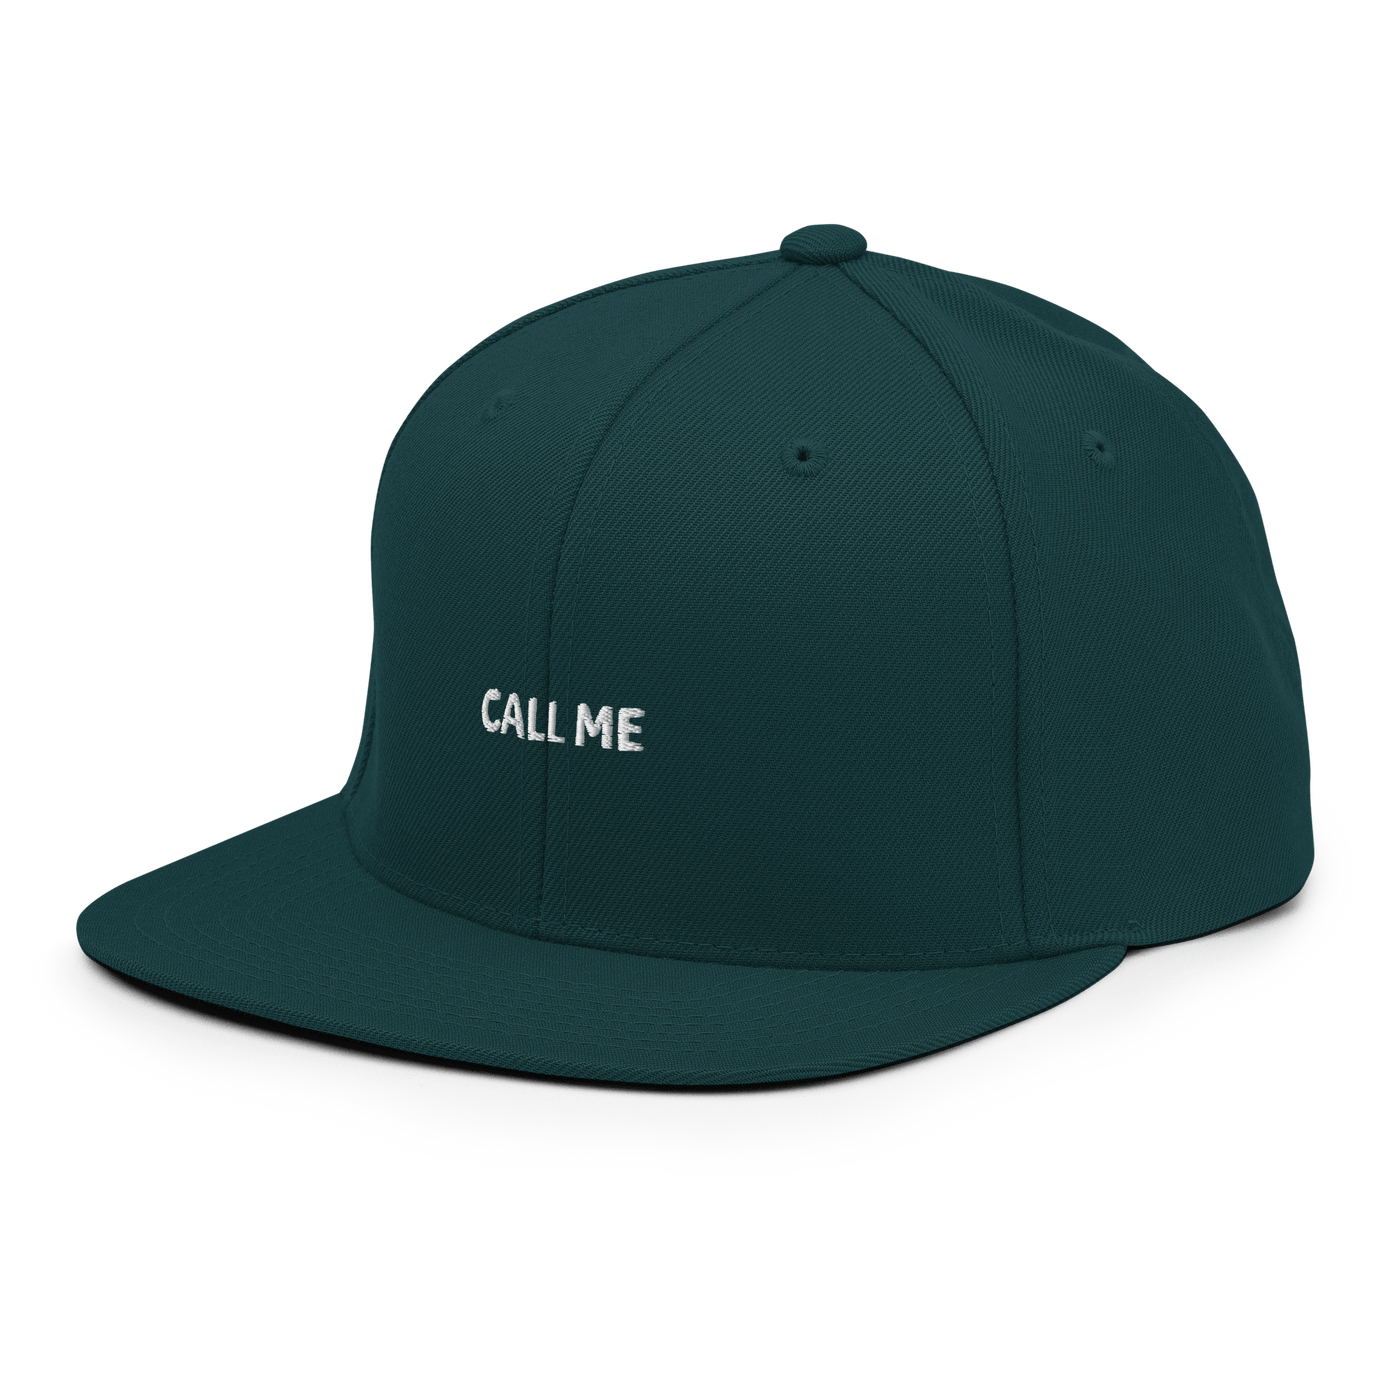 Call me Snapback - Spruce - - Just Another Cap Store